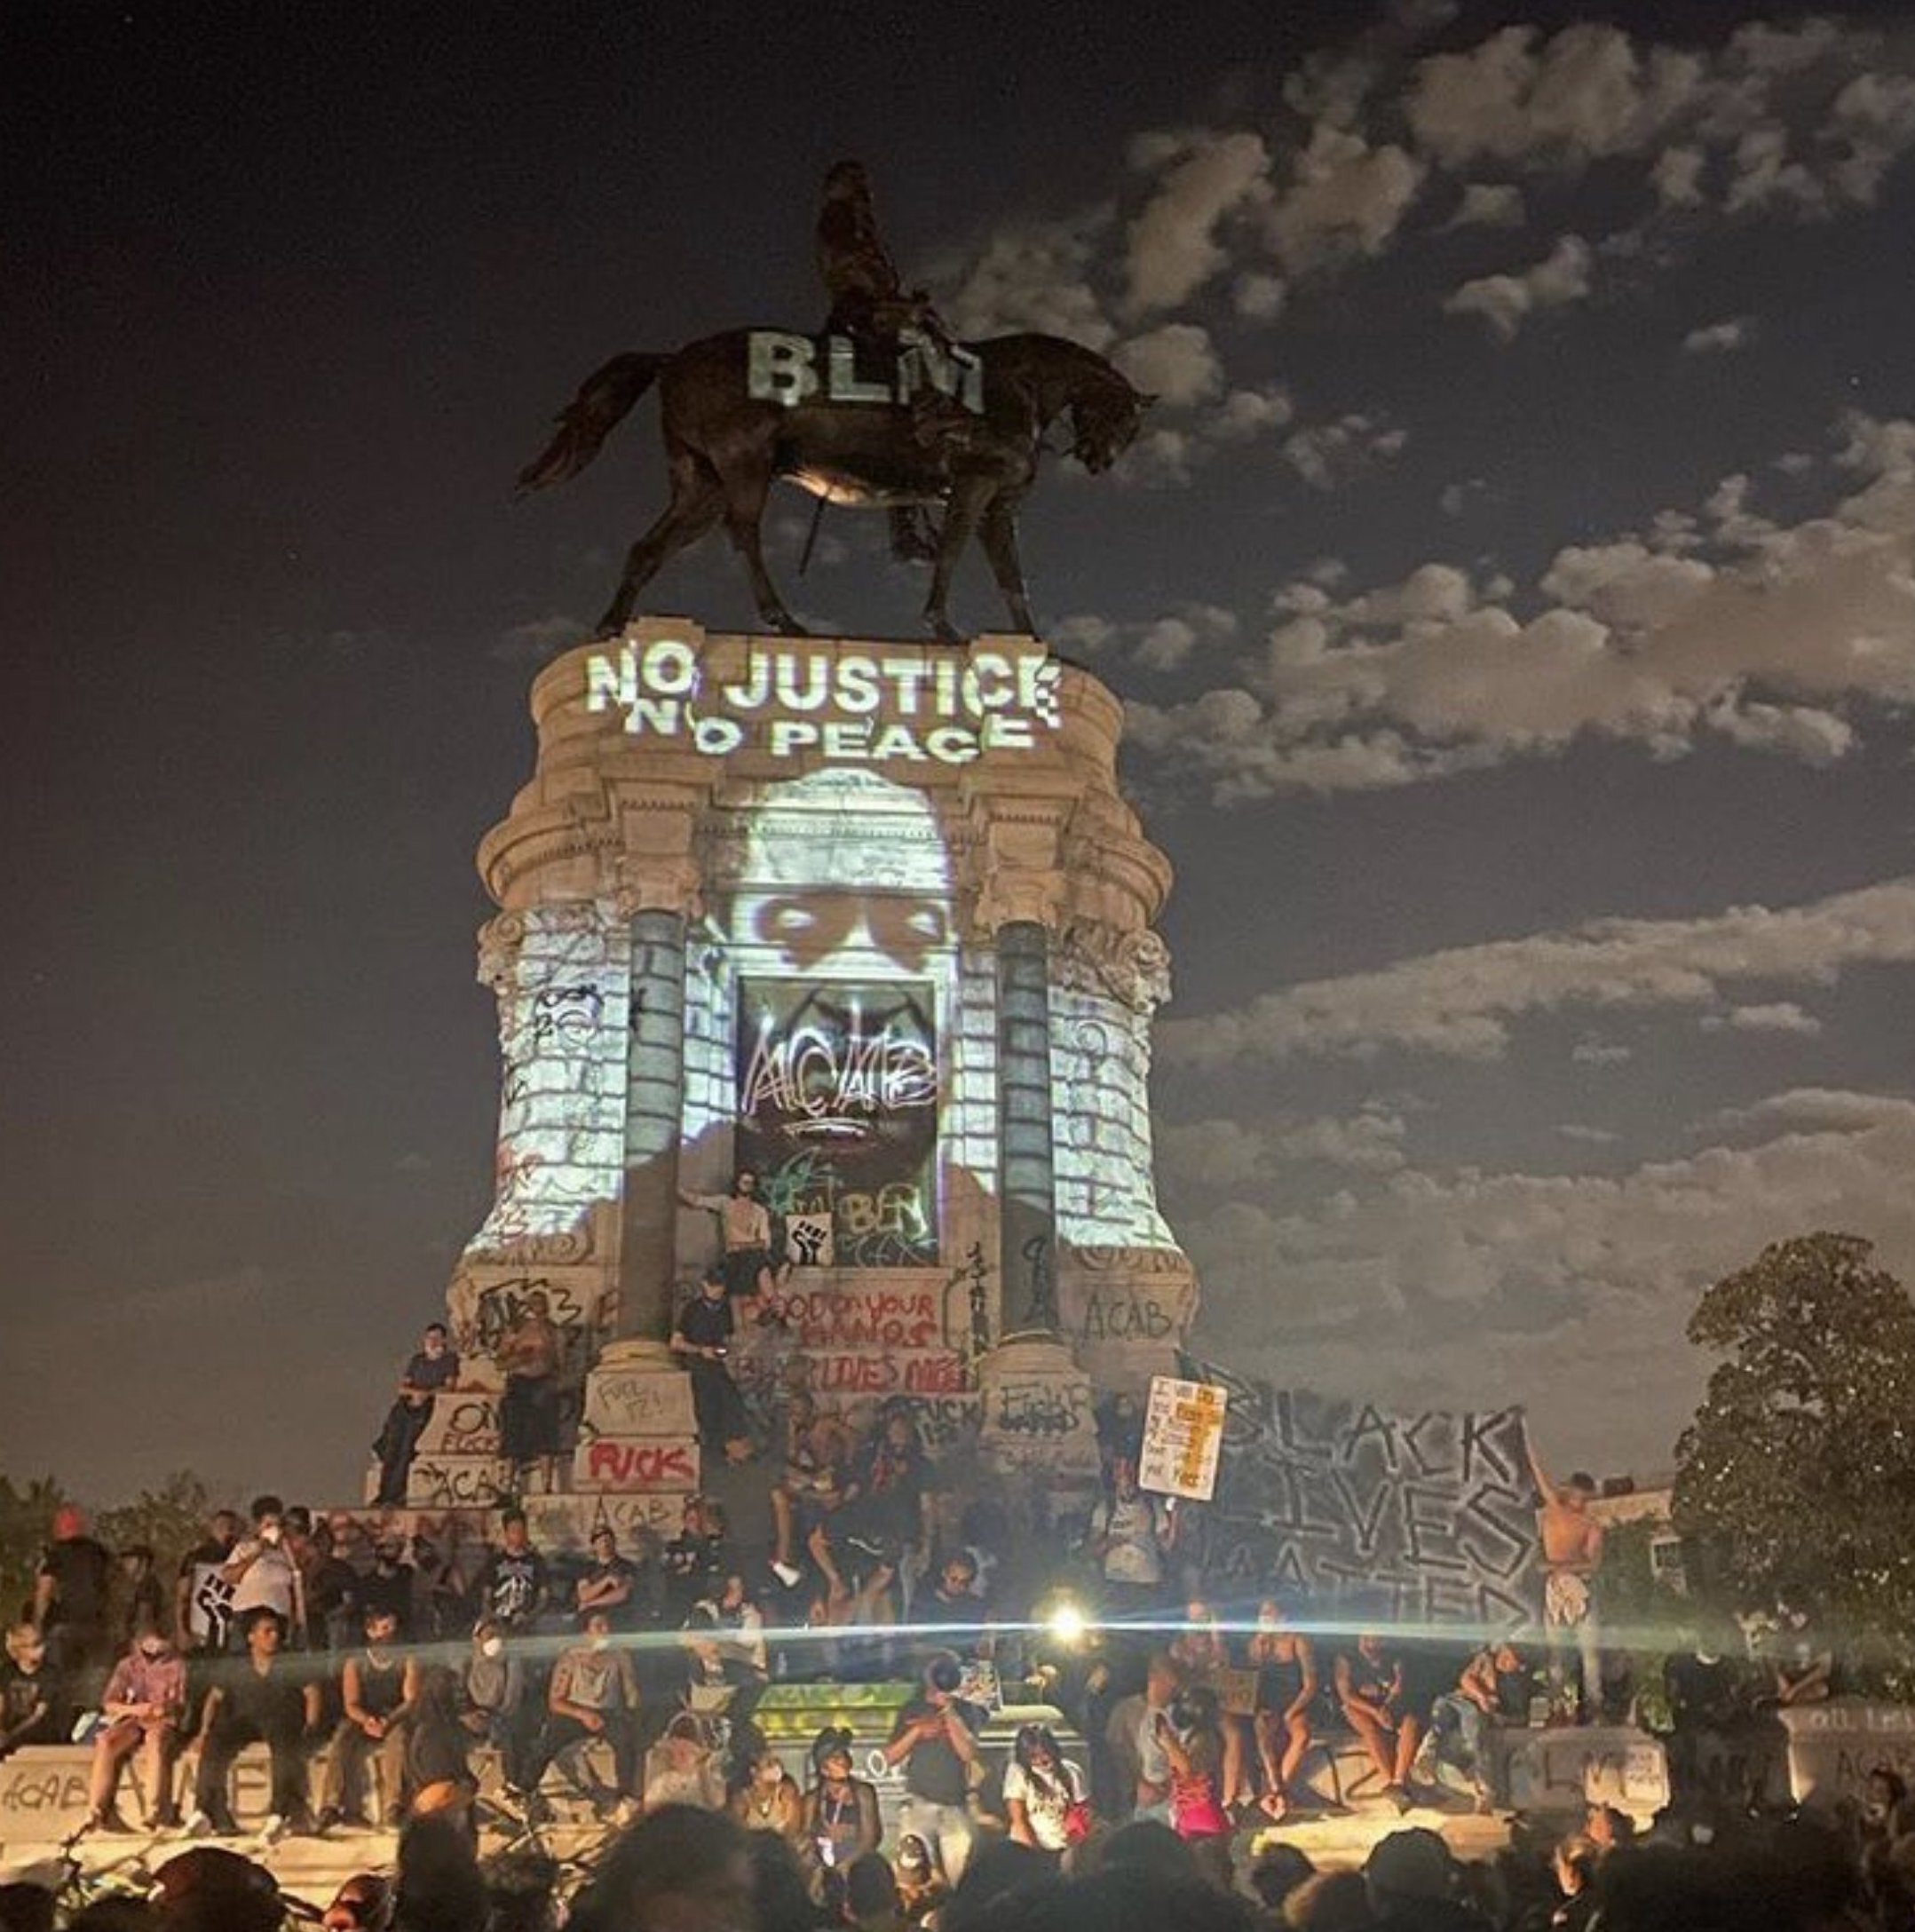  In the last few weeks, the statue of Robert E. Lee that towers over Richmond’s Monument Avenue has become an unlikely site for celebrating Black lives. (Uncredited photo via Twitter) 